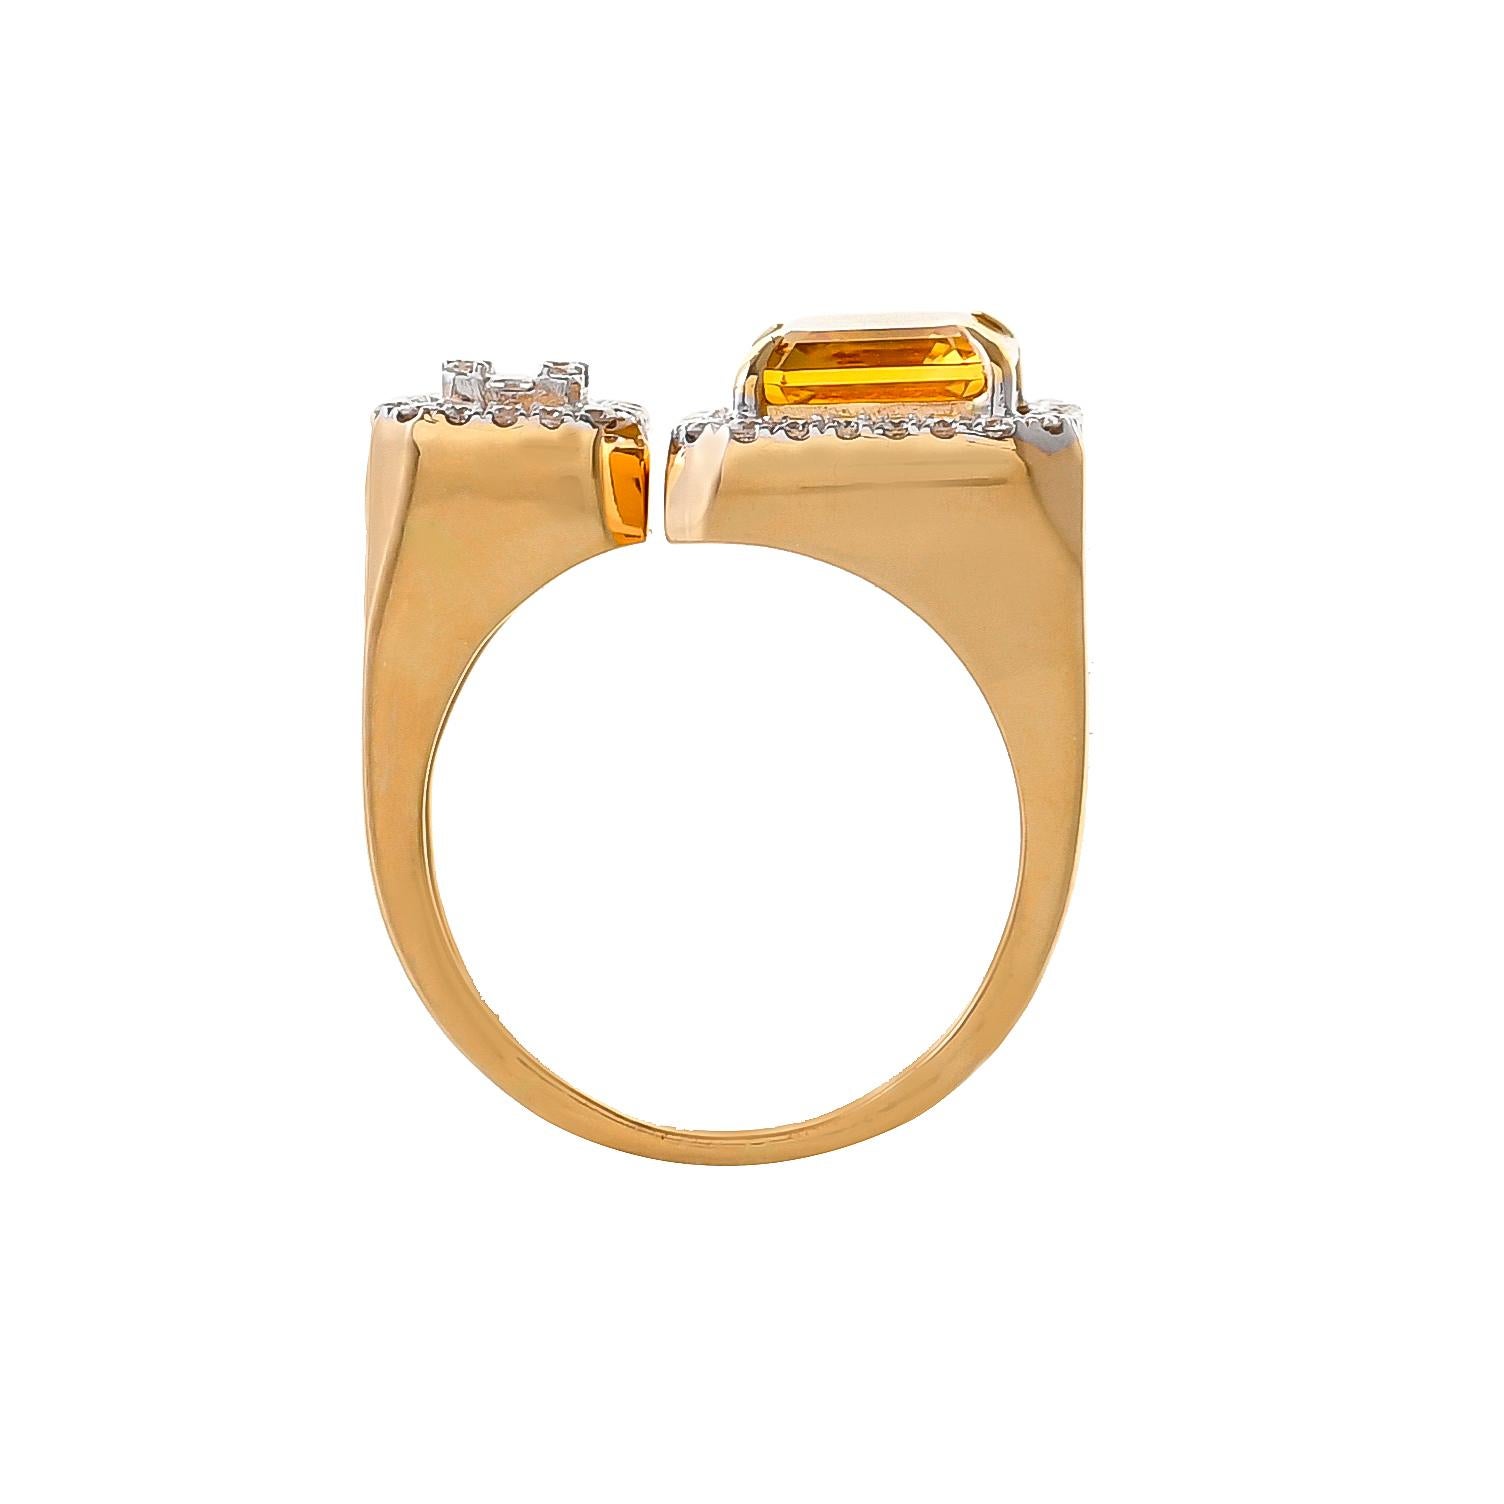 Make a bold statement with this 18kt yellow gold open band ring featuring octagon-shaped honey quartz weighing approximately 2.90 carats set within a frame of round diamonds, the other terminal is set with diamond baguettes surrounded with diamonds